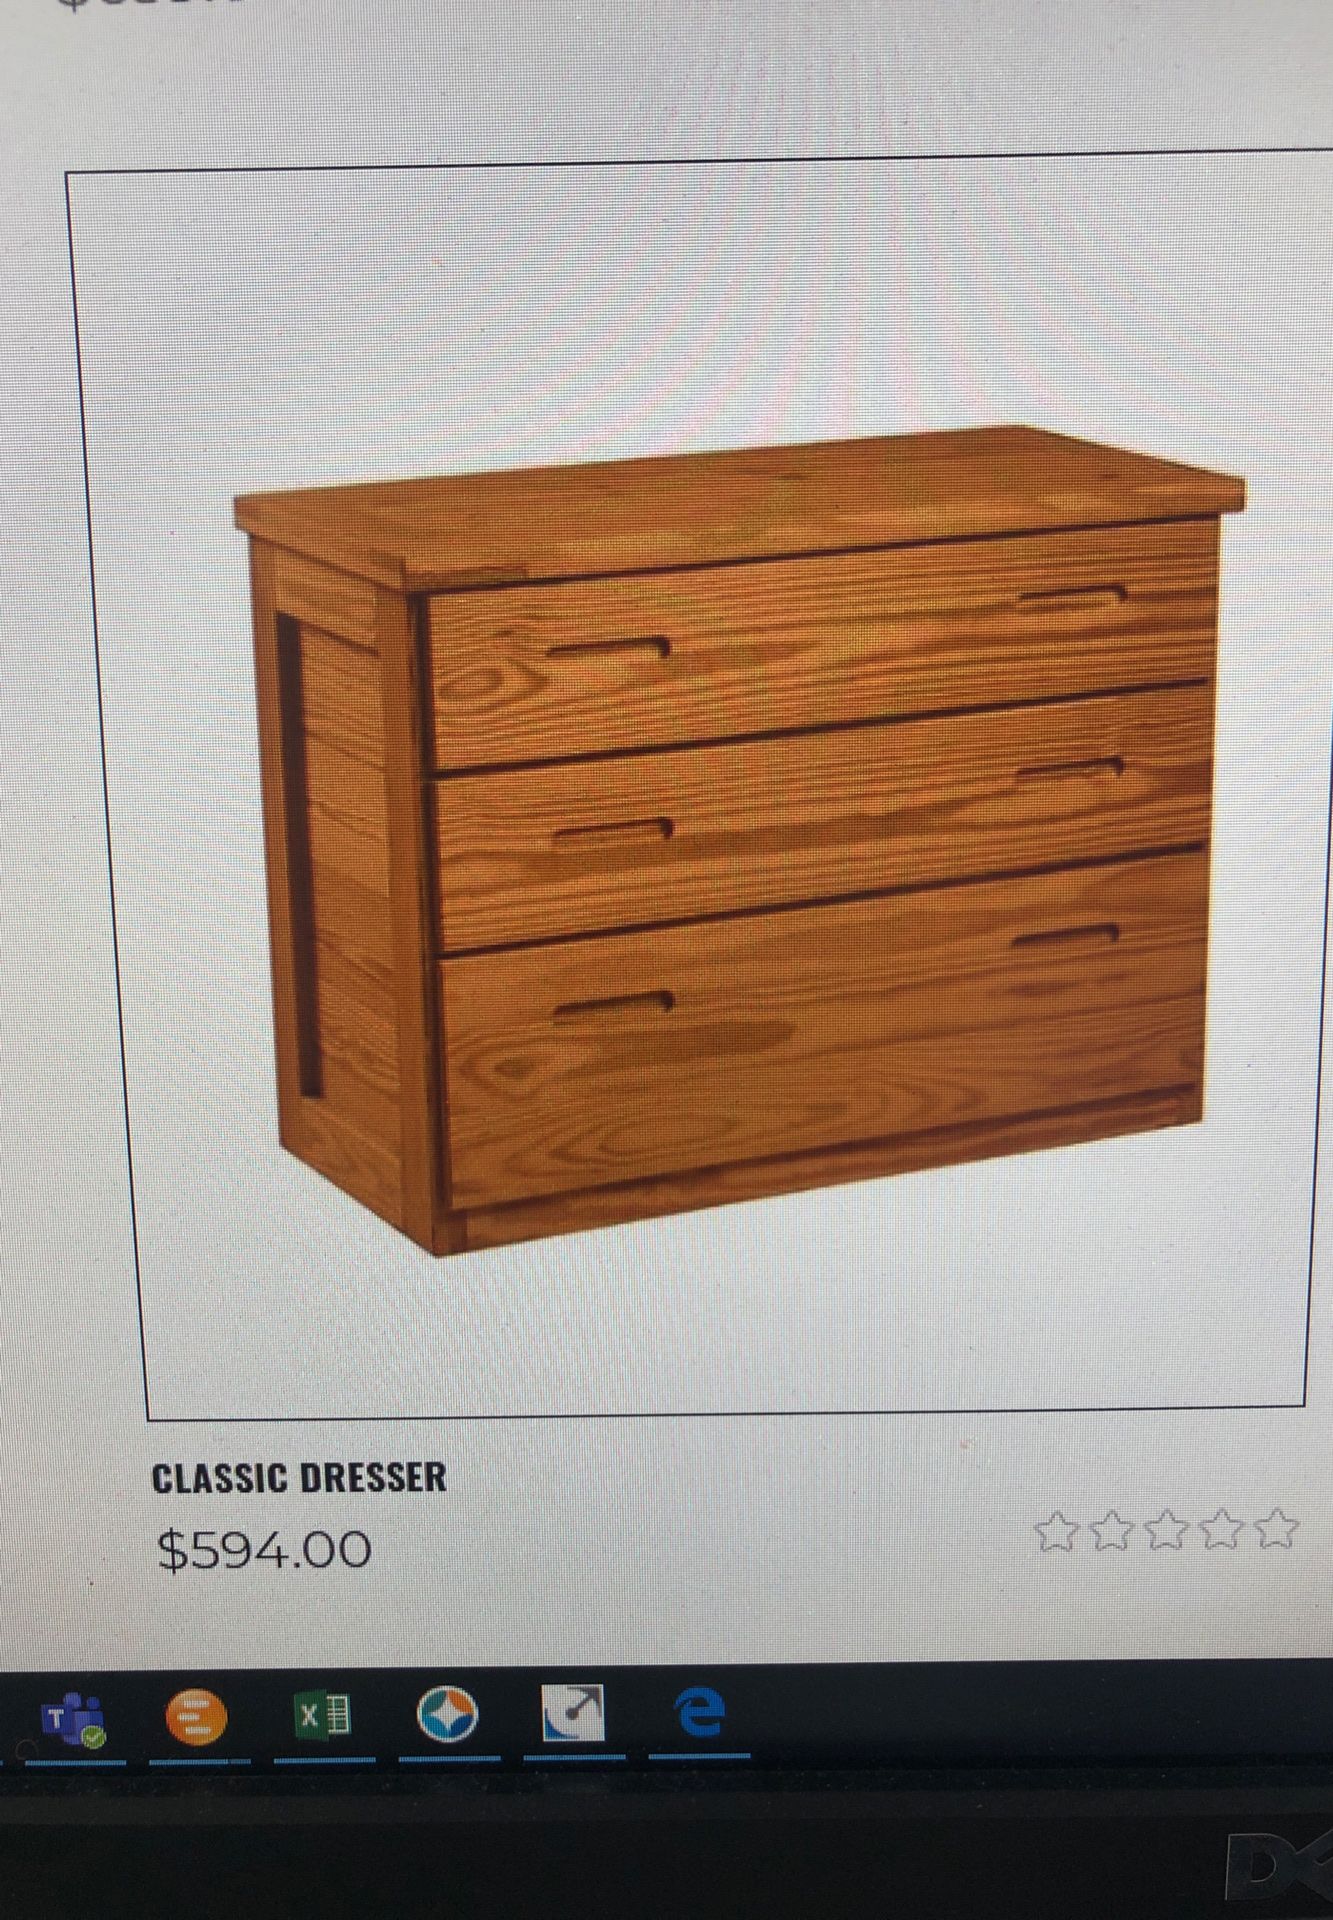 This End Up dresser